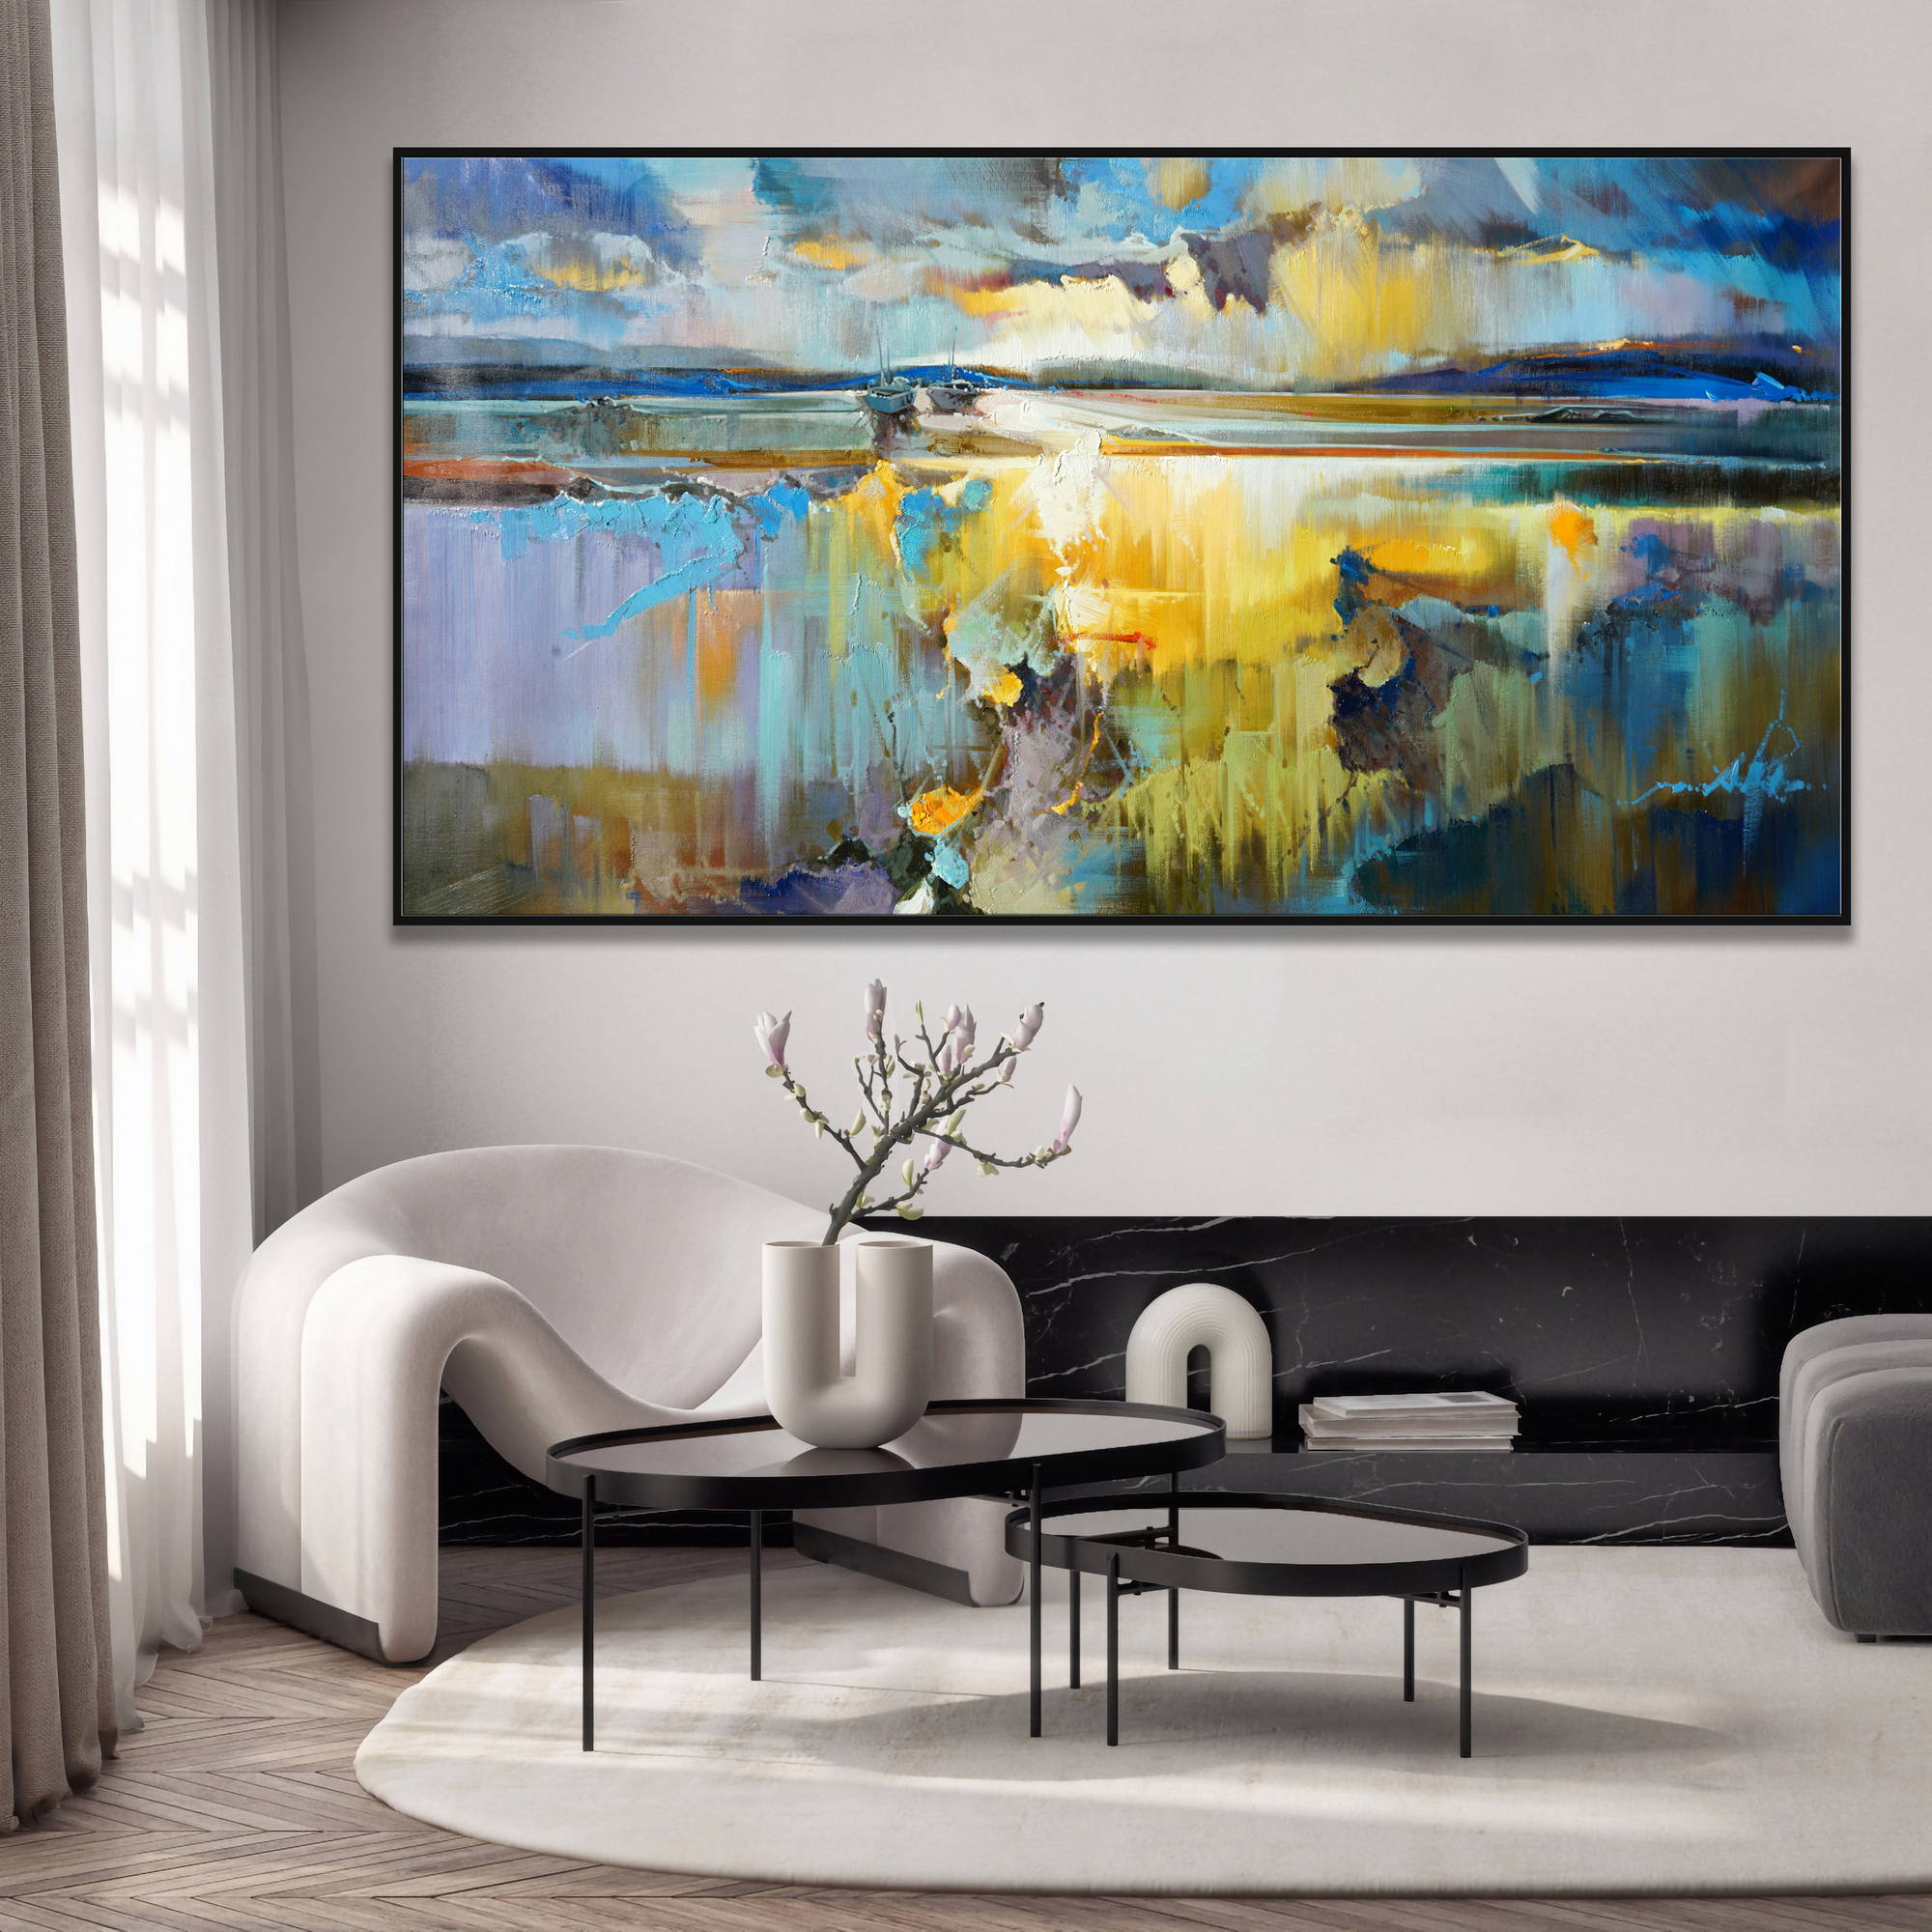 Hand painted Abstract Seascape at sunset 90x180cm